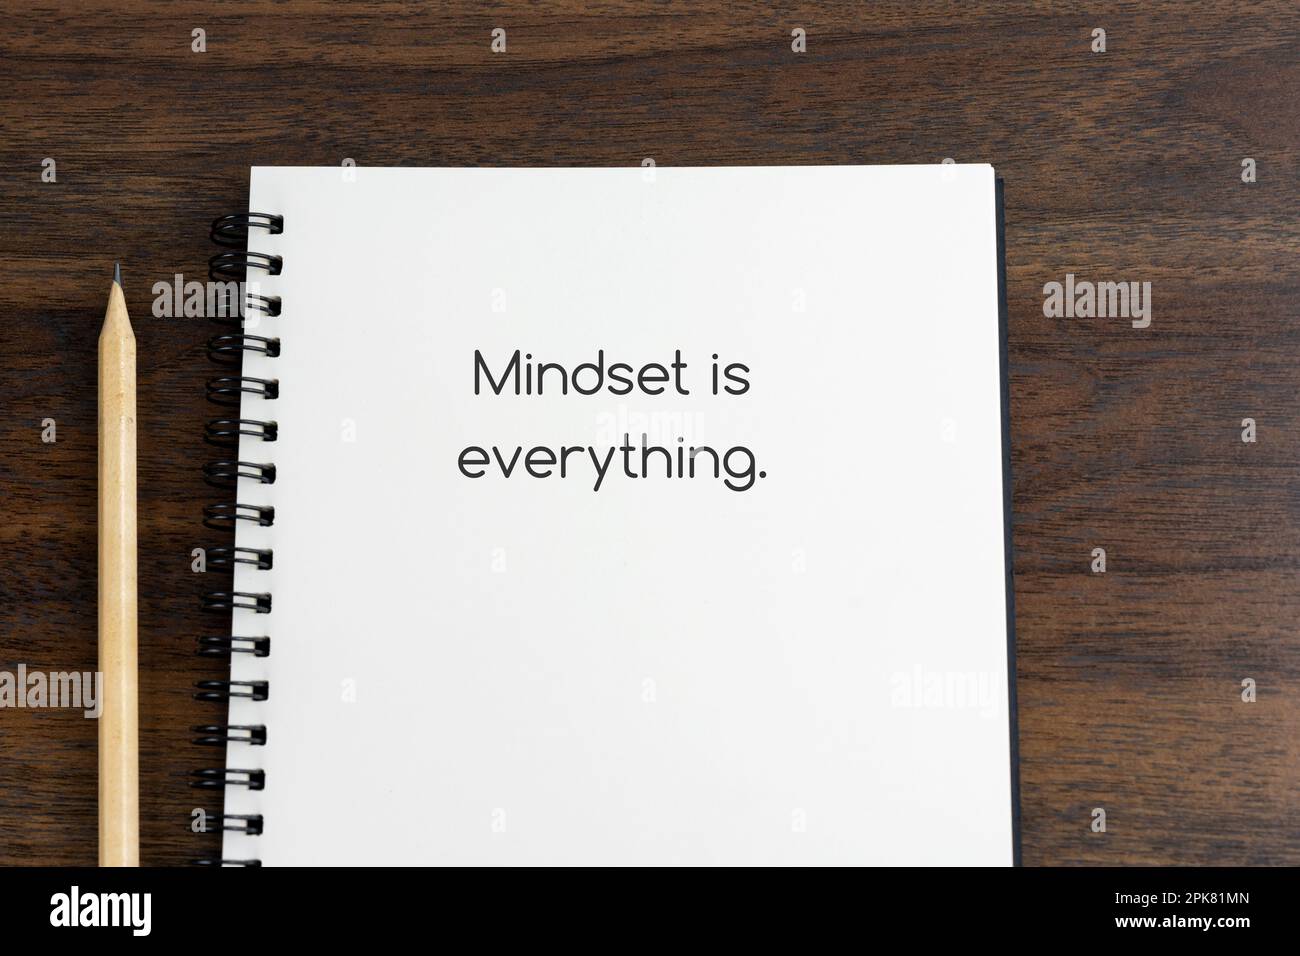 Short inspirational quotes text on note pad - Mindset is everything Stock Photo